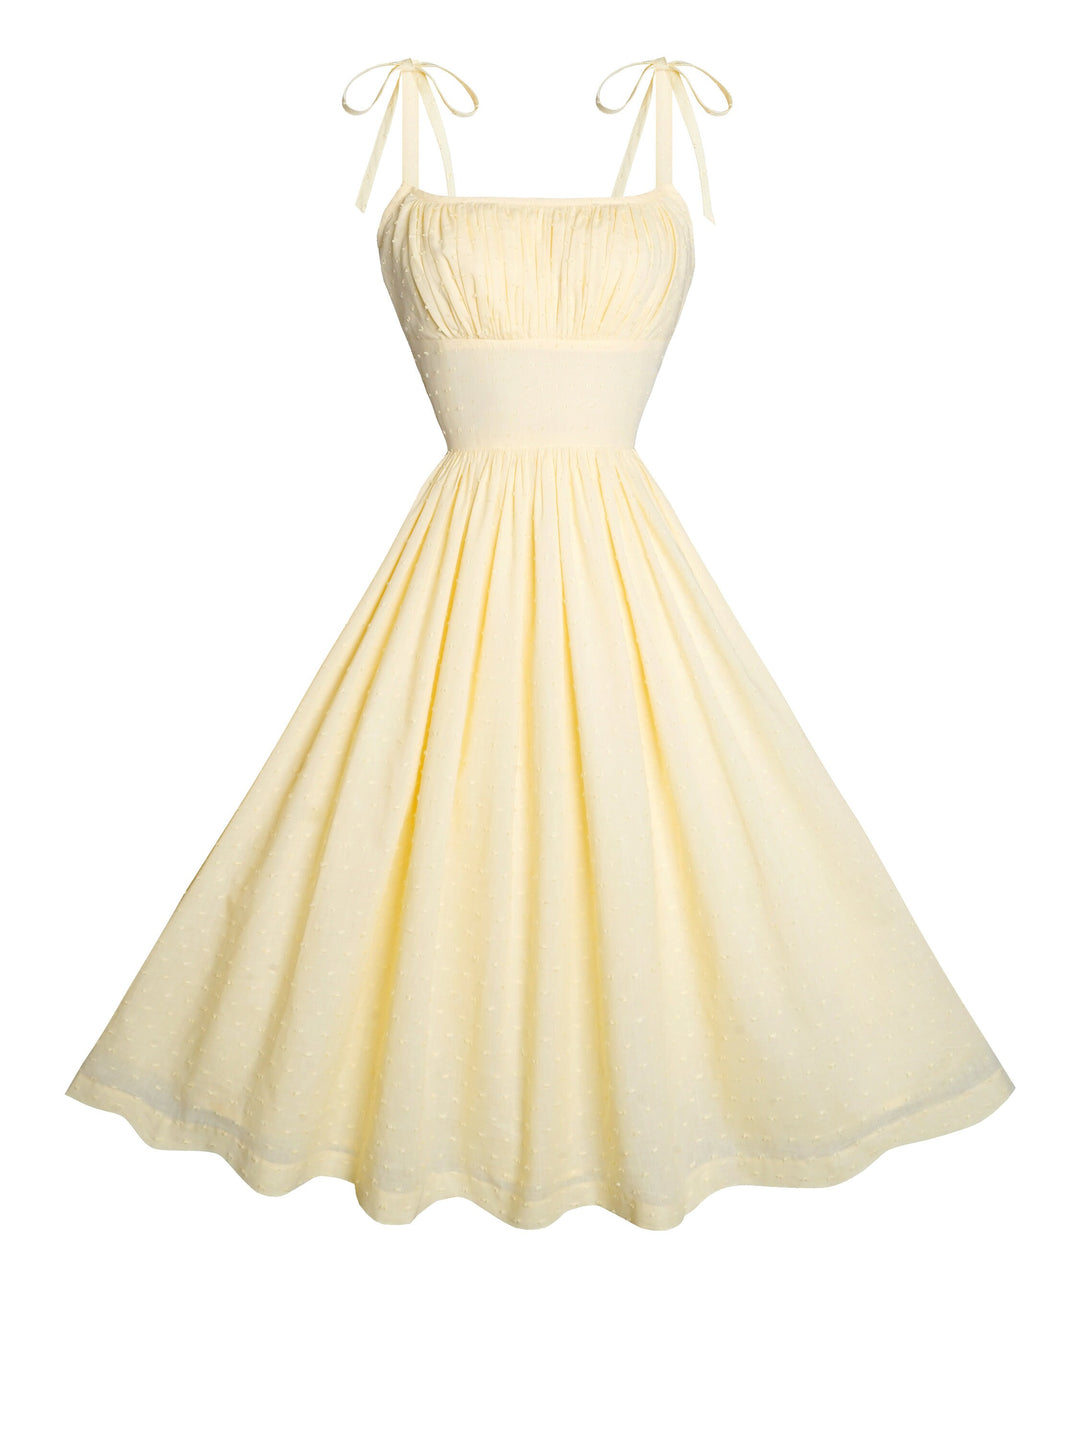 MTO - Kelly Dress in Pale Yellow “Dotted Swiss”